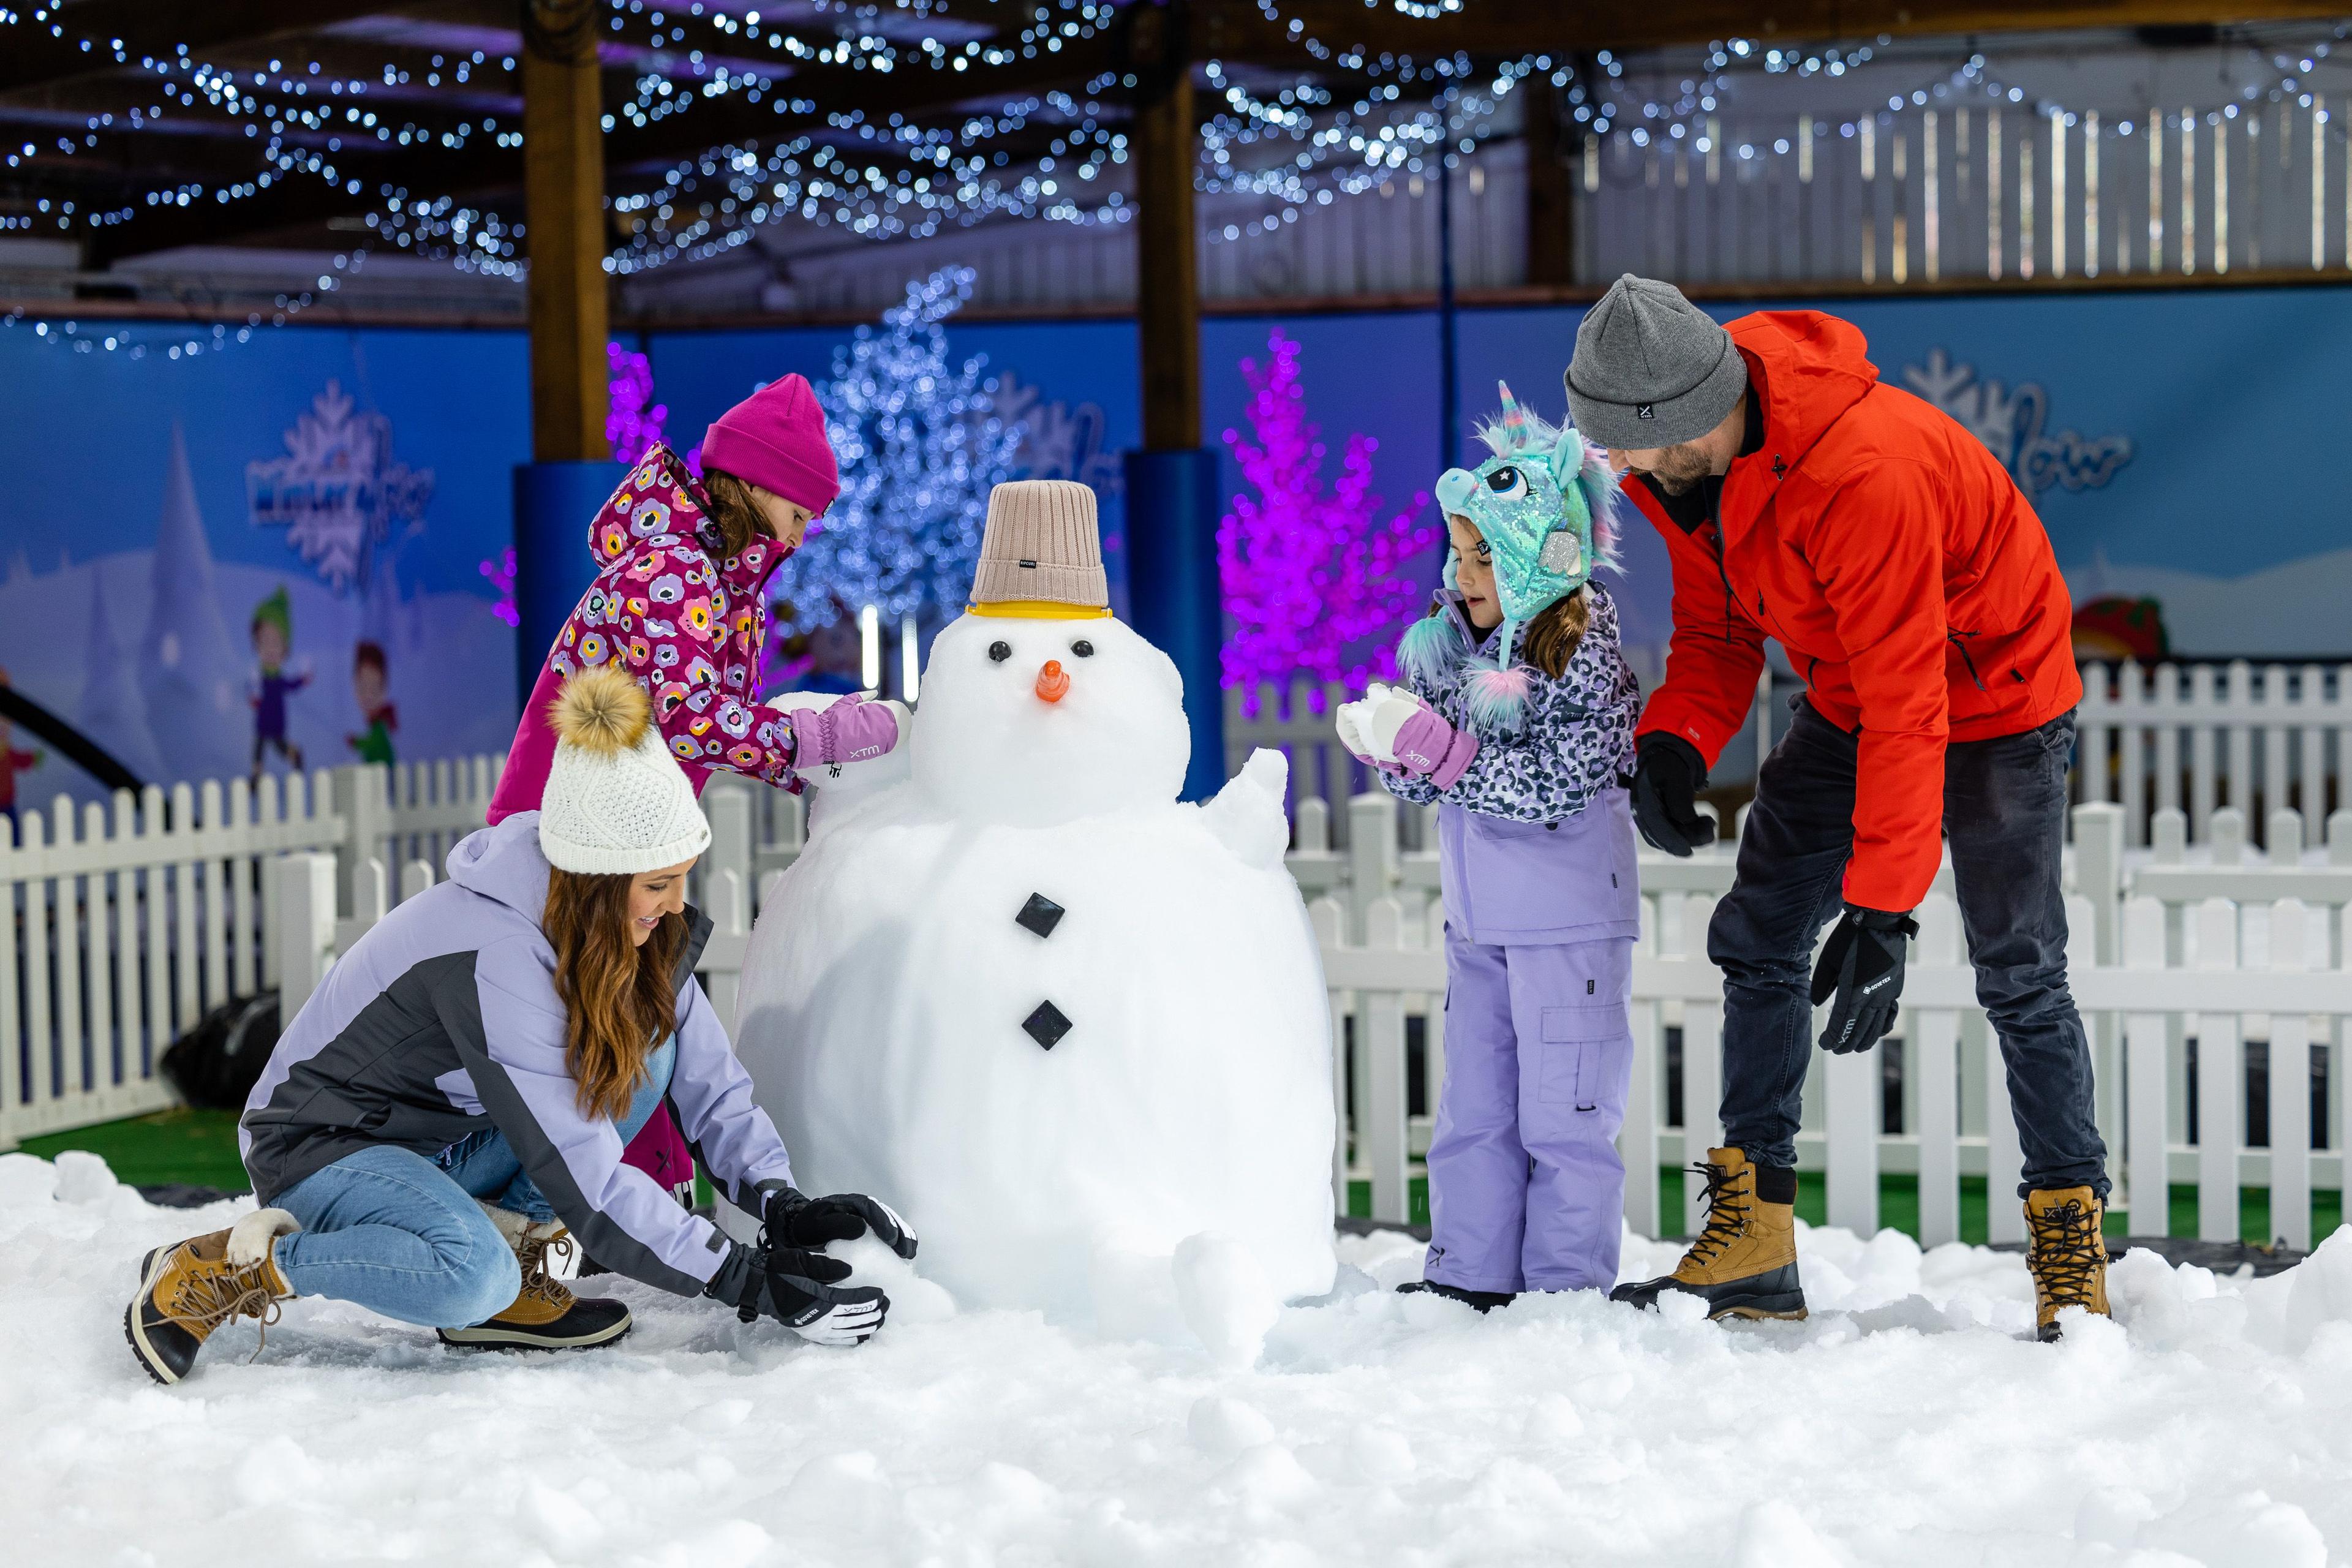 Build a snowman in our Snow Play Zone background